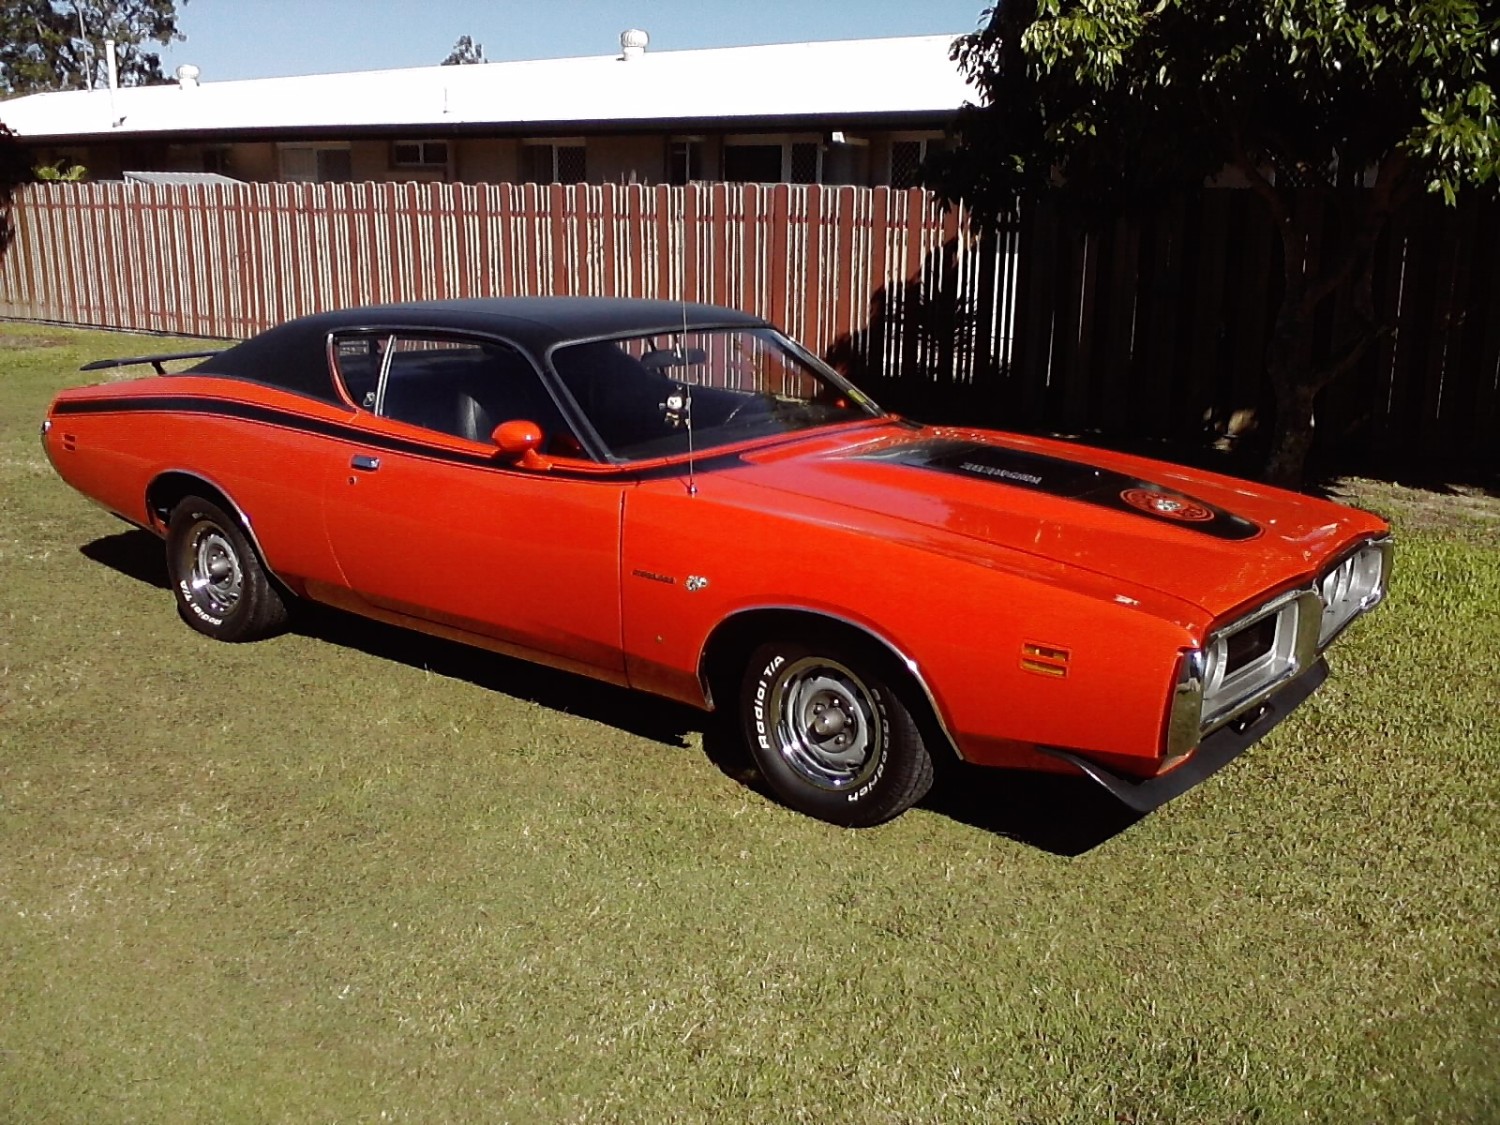 1971 Dodge Charger Super Bee - laza56 - Shannons Club